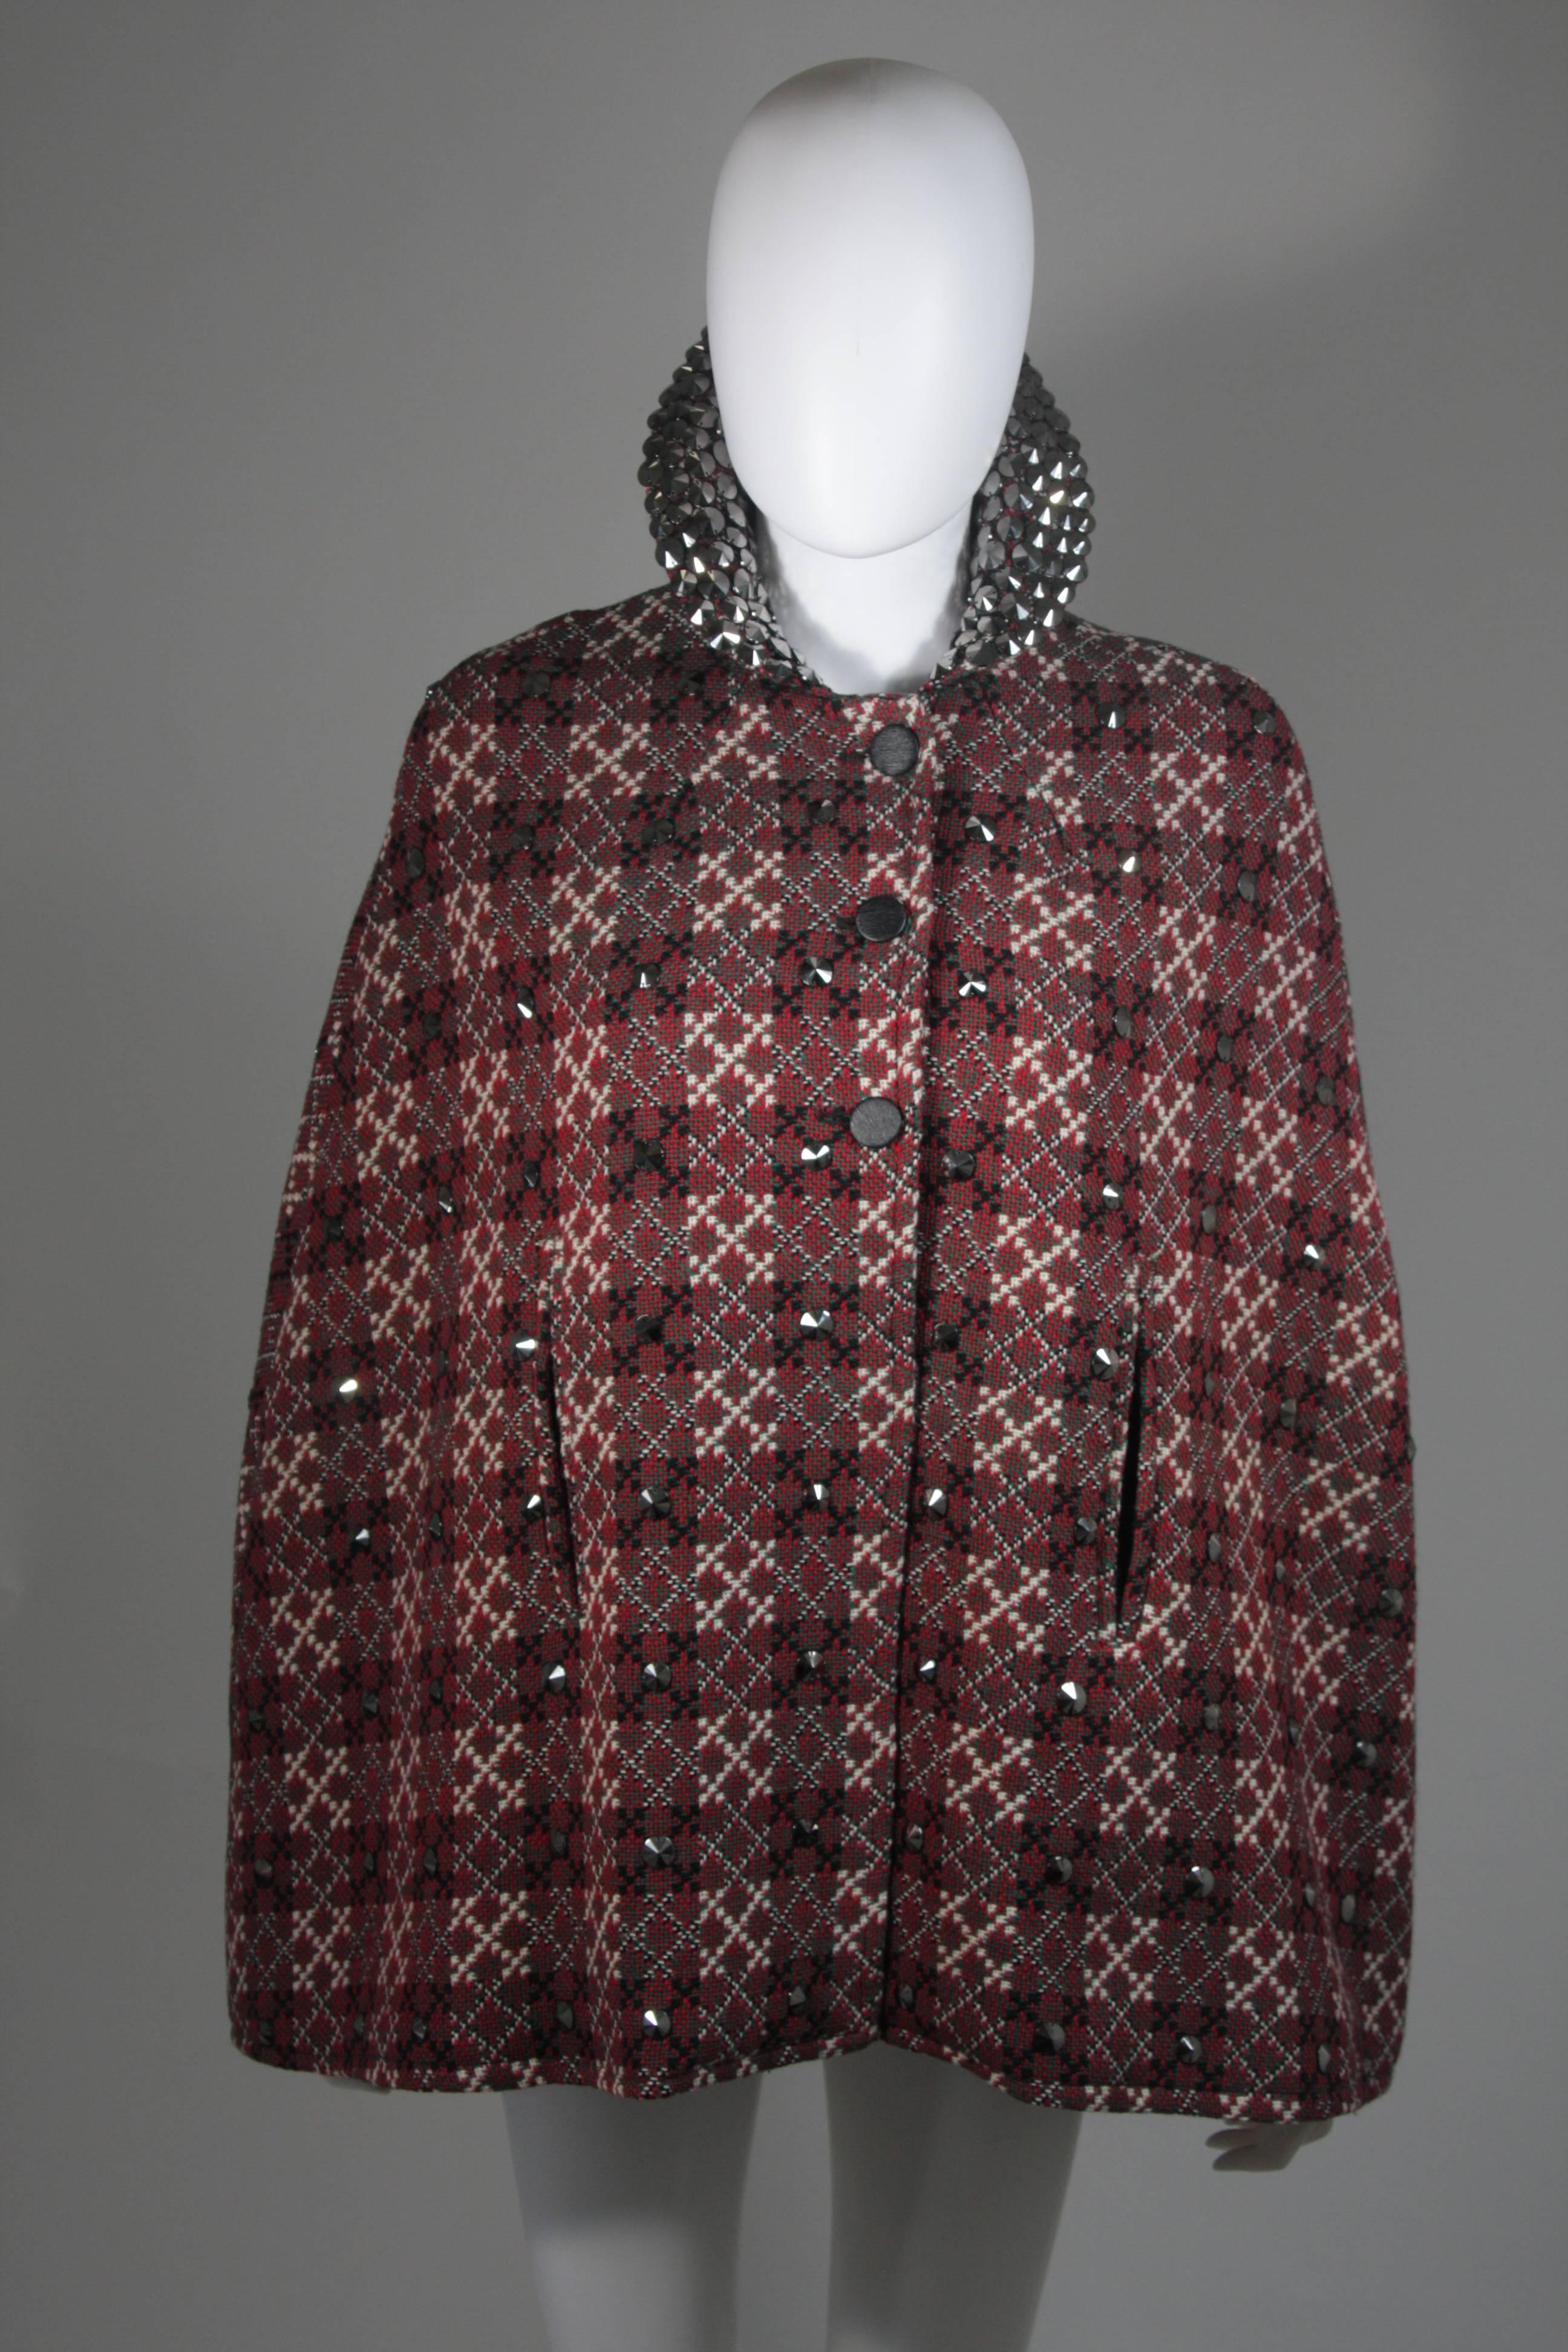  This cape is composed of a plaid wool, in red, green, and cream. The cape is a vintage design with a modern twist, the gunmetal hue embellishments are a modern addition by 'Vutique'. The jacket has a front button closure. In excellent vintage